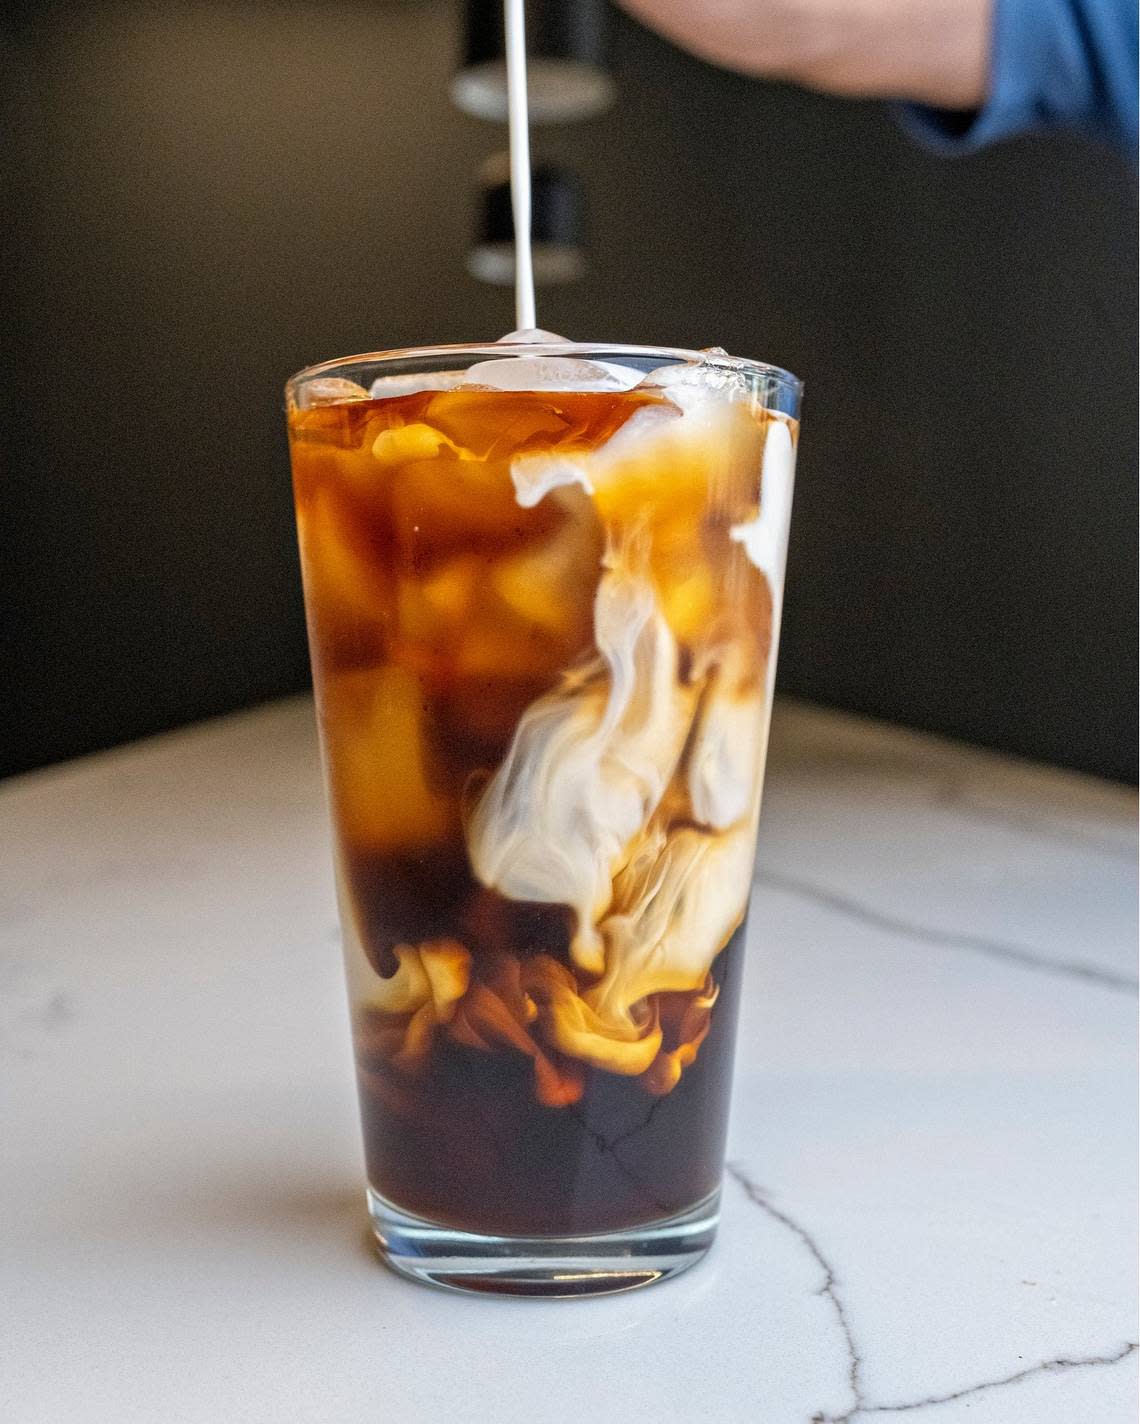 Grand Coffee Co. offers cold brew, lattes, matcha and more.